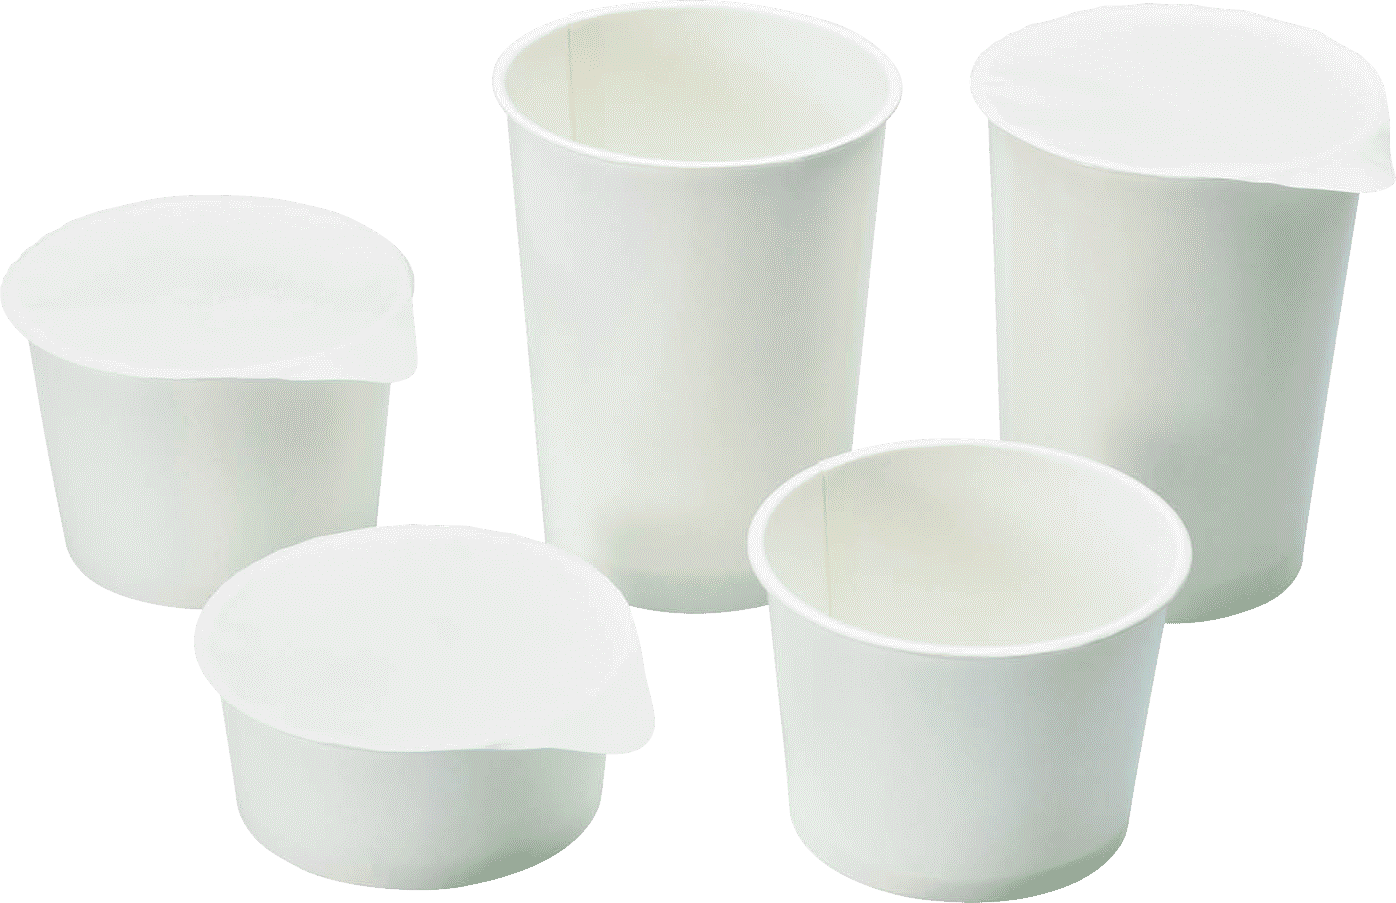 Although paper cups have a better ecological footprint, they are more sensitive. Moisture and heat can damage the material.